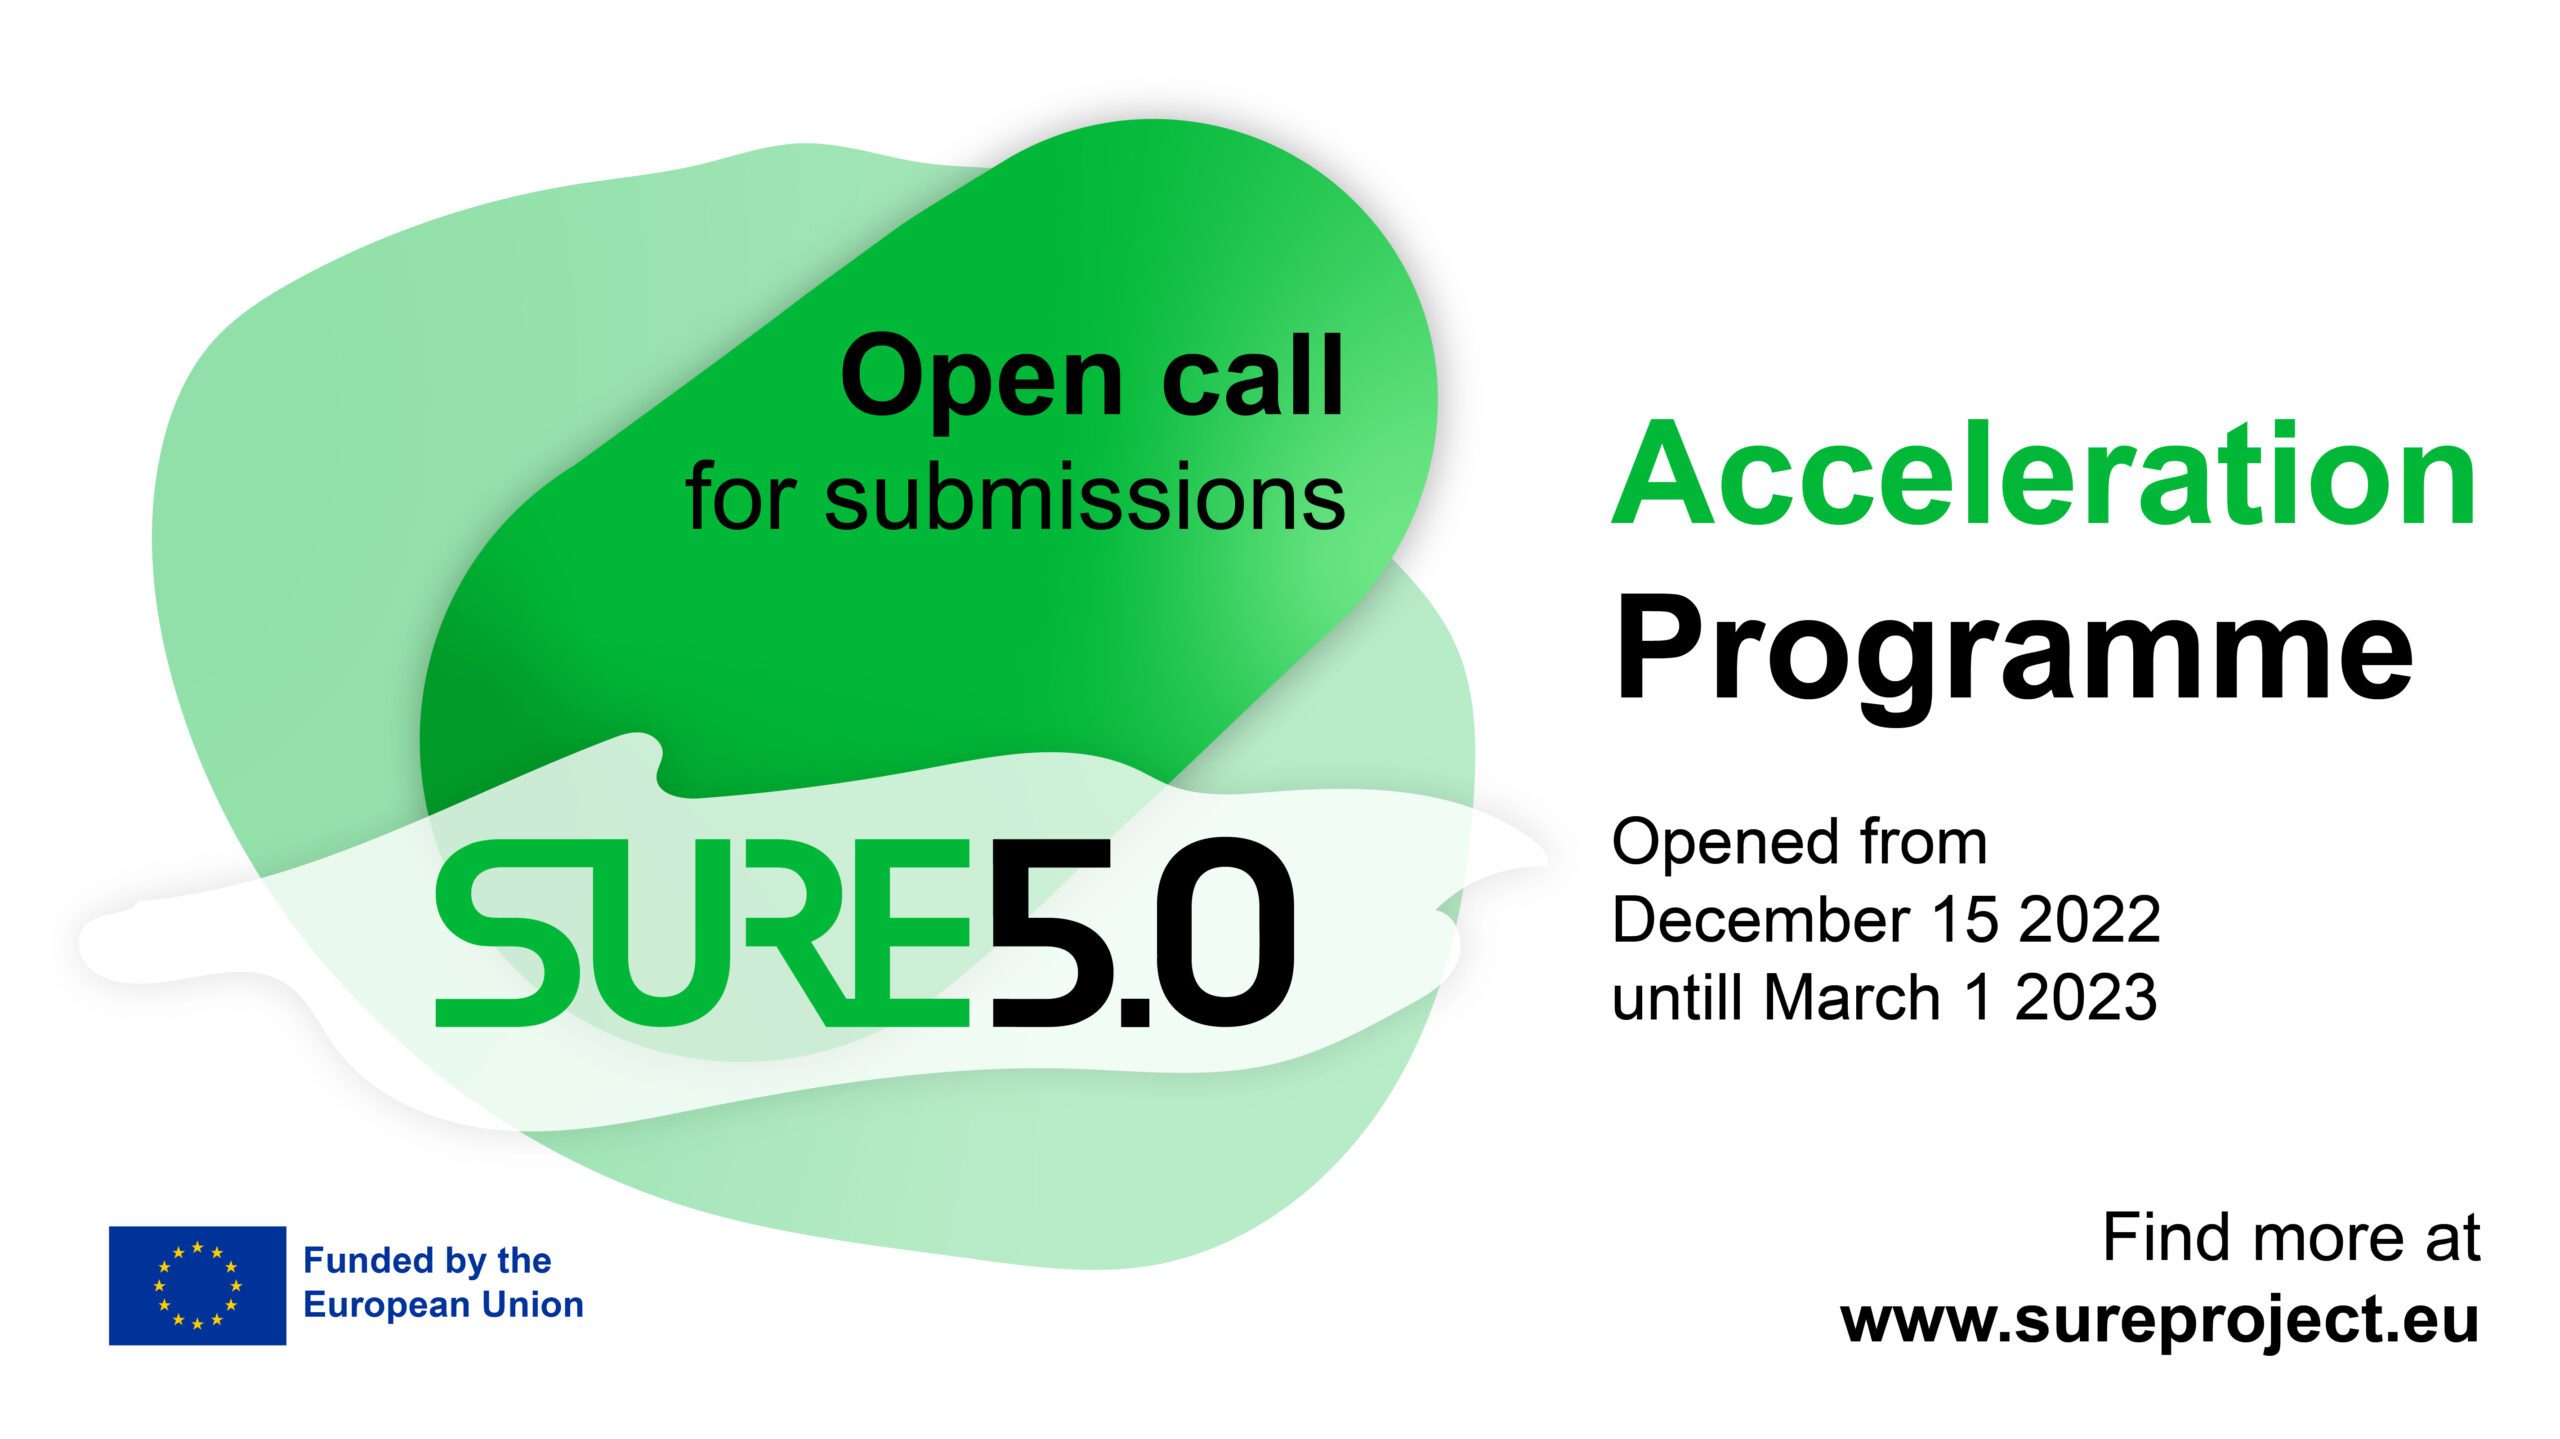 SURE5.0 is launching its first Acceleration Programme to support SMEs in their transition towards industry 5.0